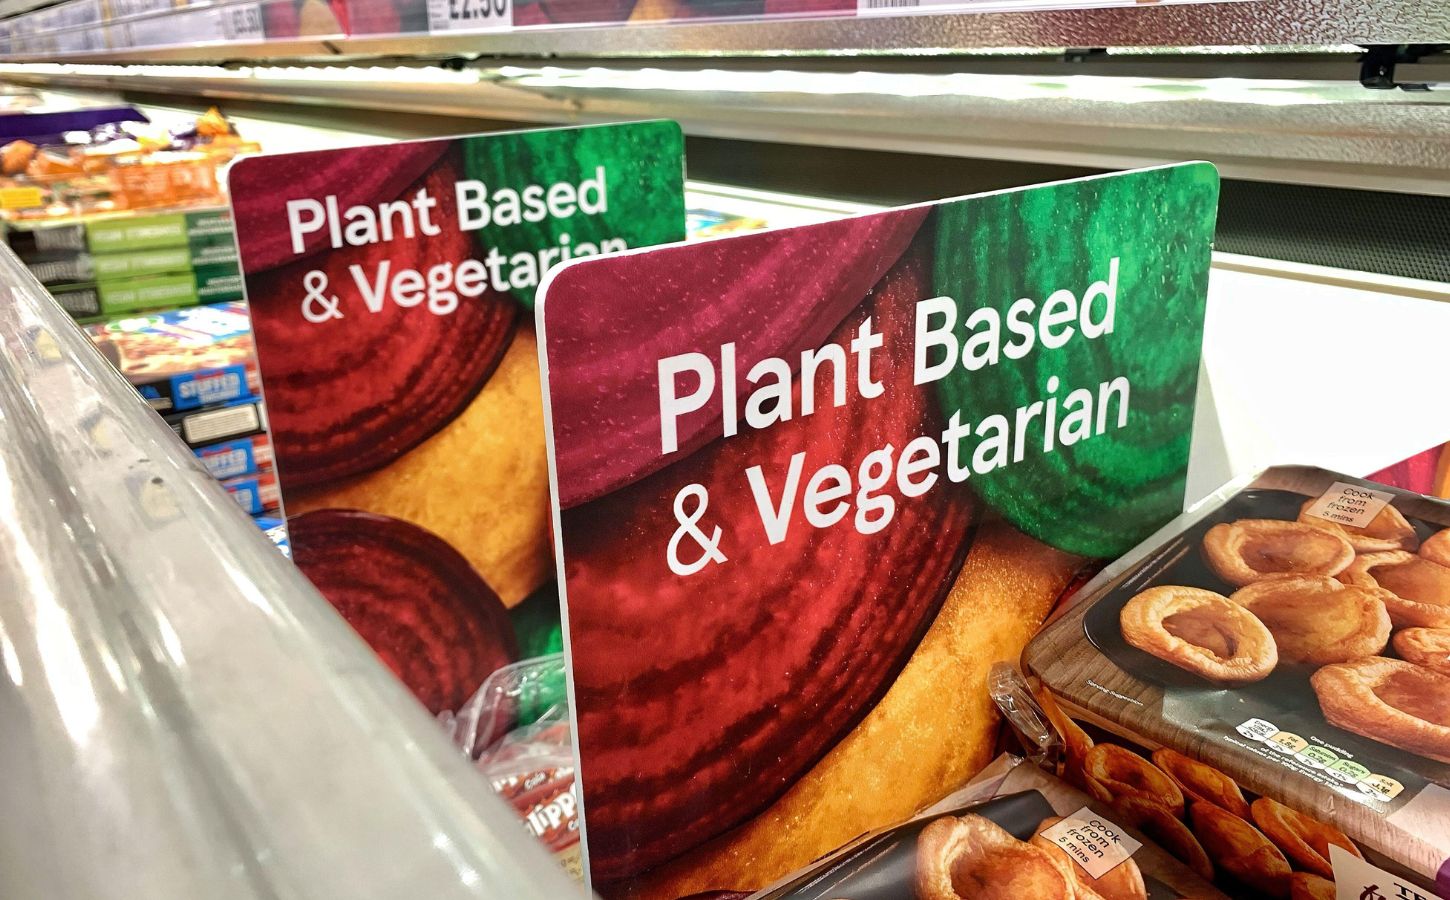 Plant-based and vegetarian section in a supermarket